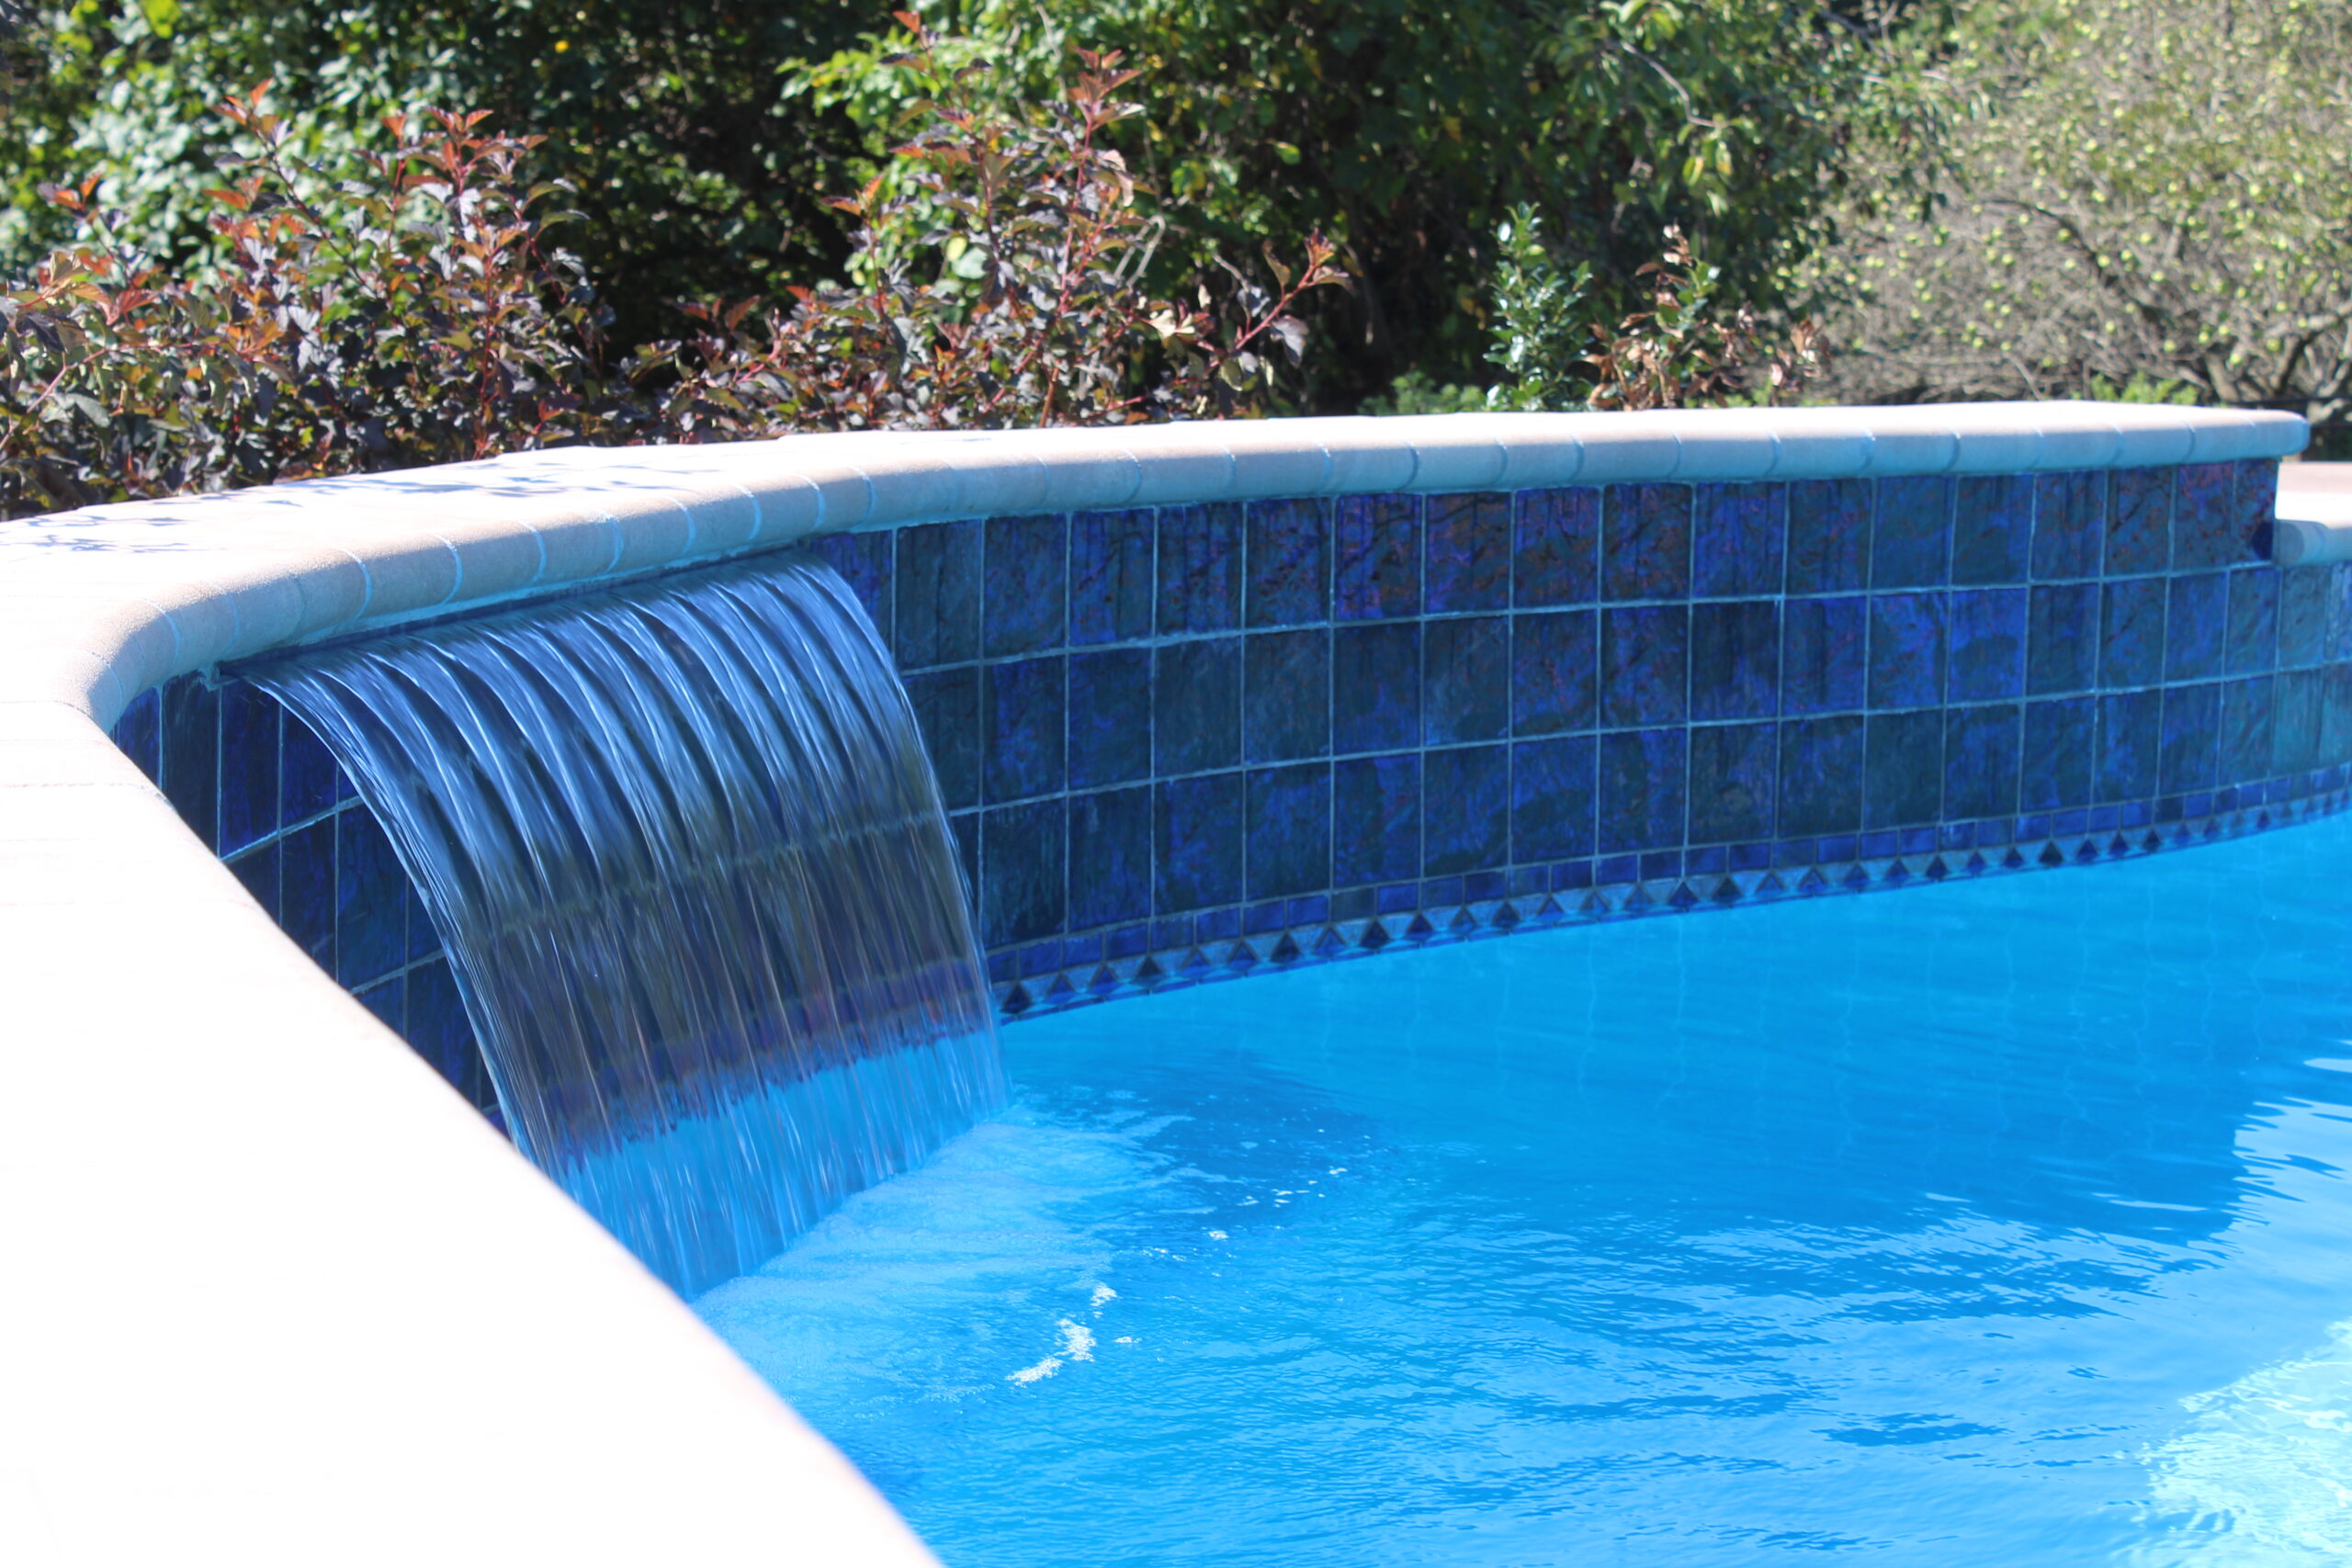 Pool 101: What Different Colored Water Means 